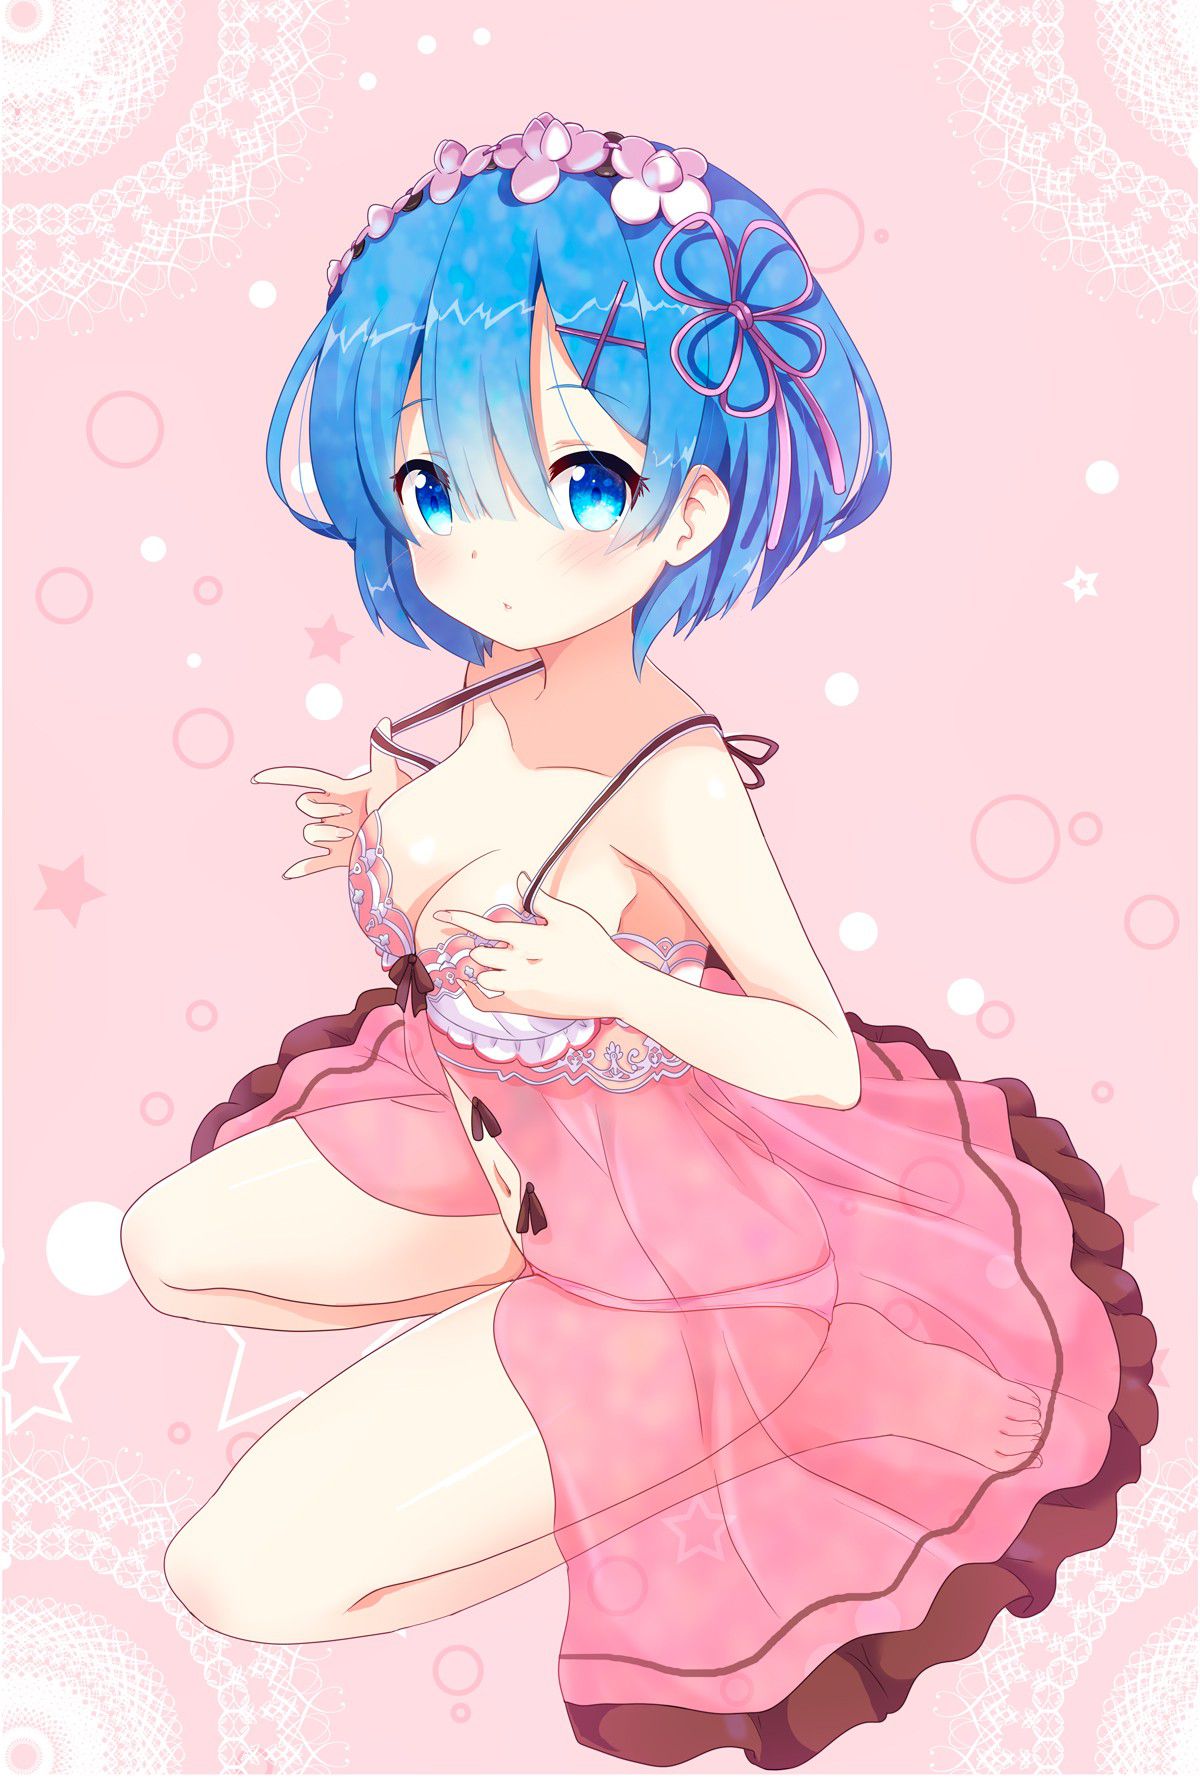 [2nd] Secondary erotic image of a girl with blue or light blue hair Part 7 [Blue hair] 6